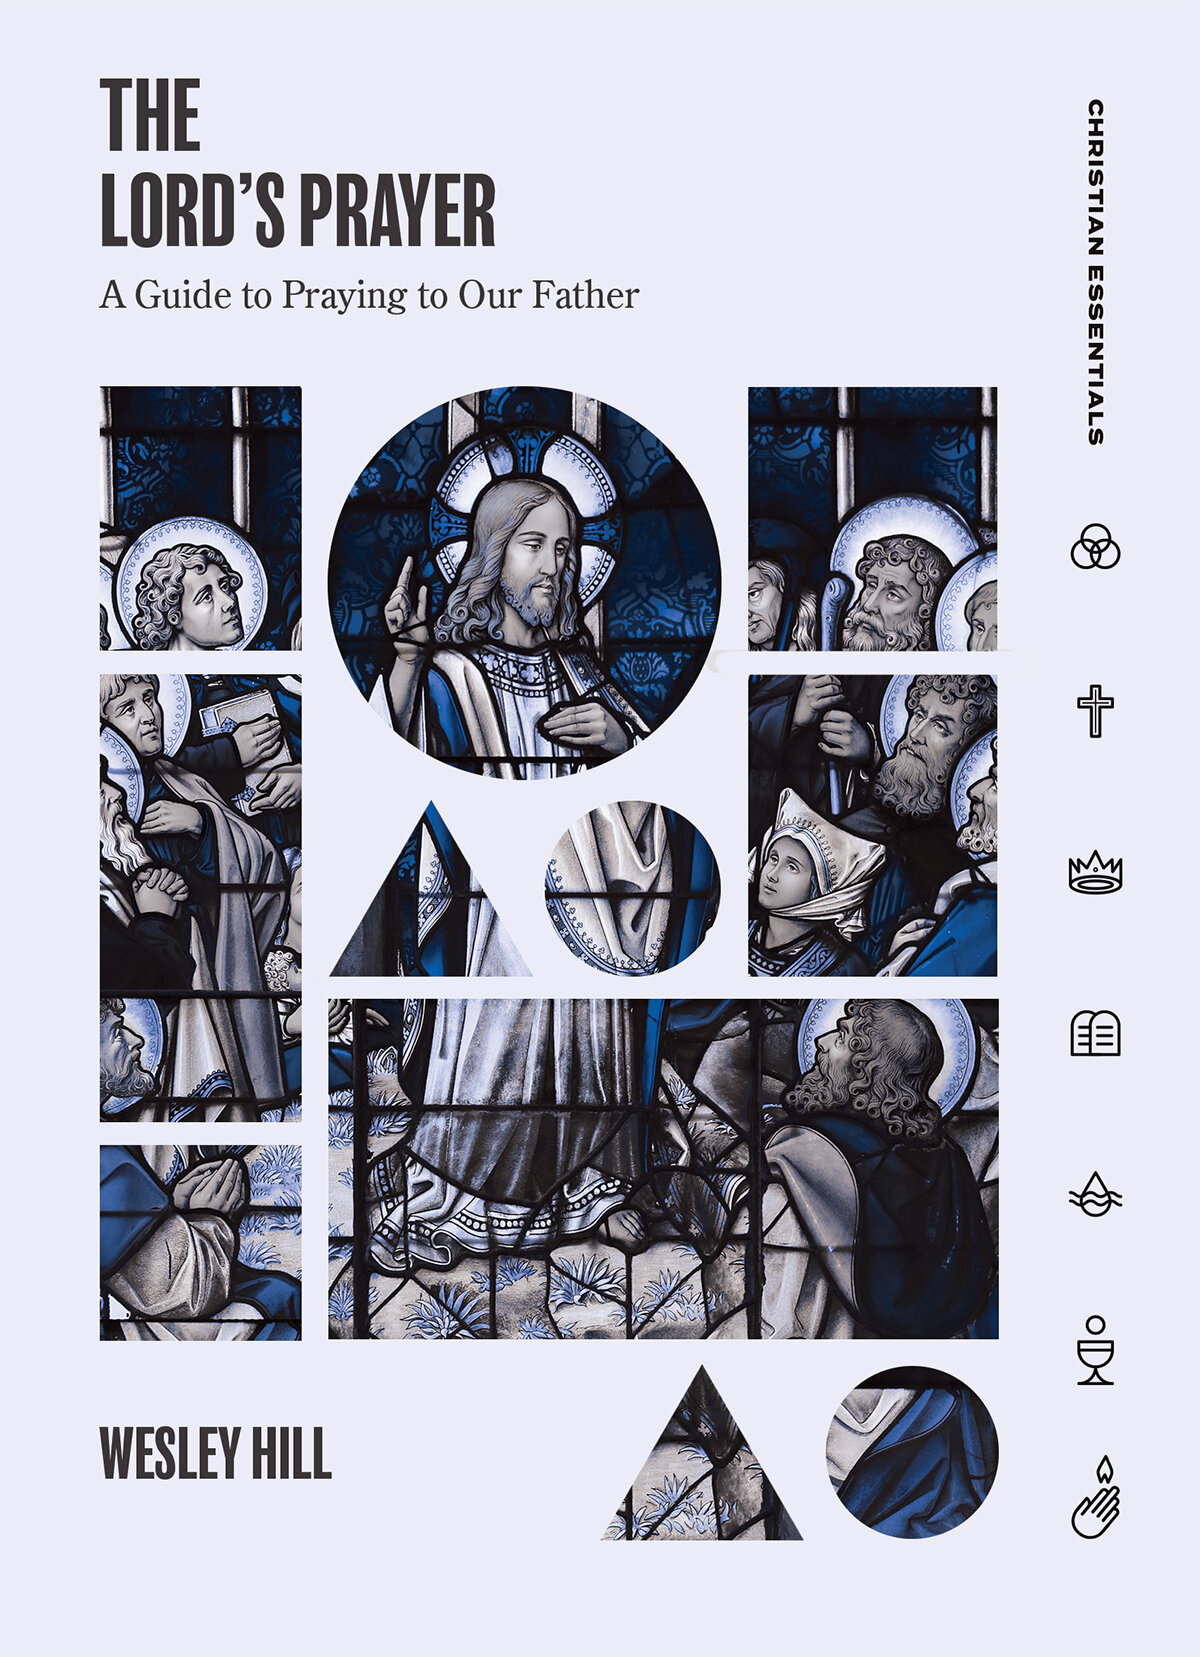 The Lord’s Prayer: A Guide to Praying to Our Father